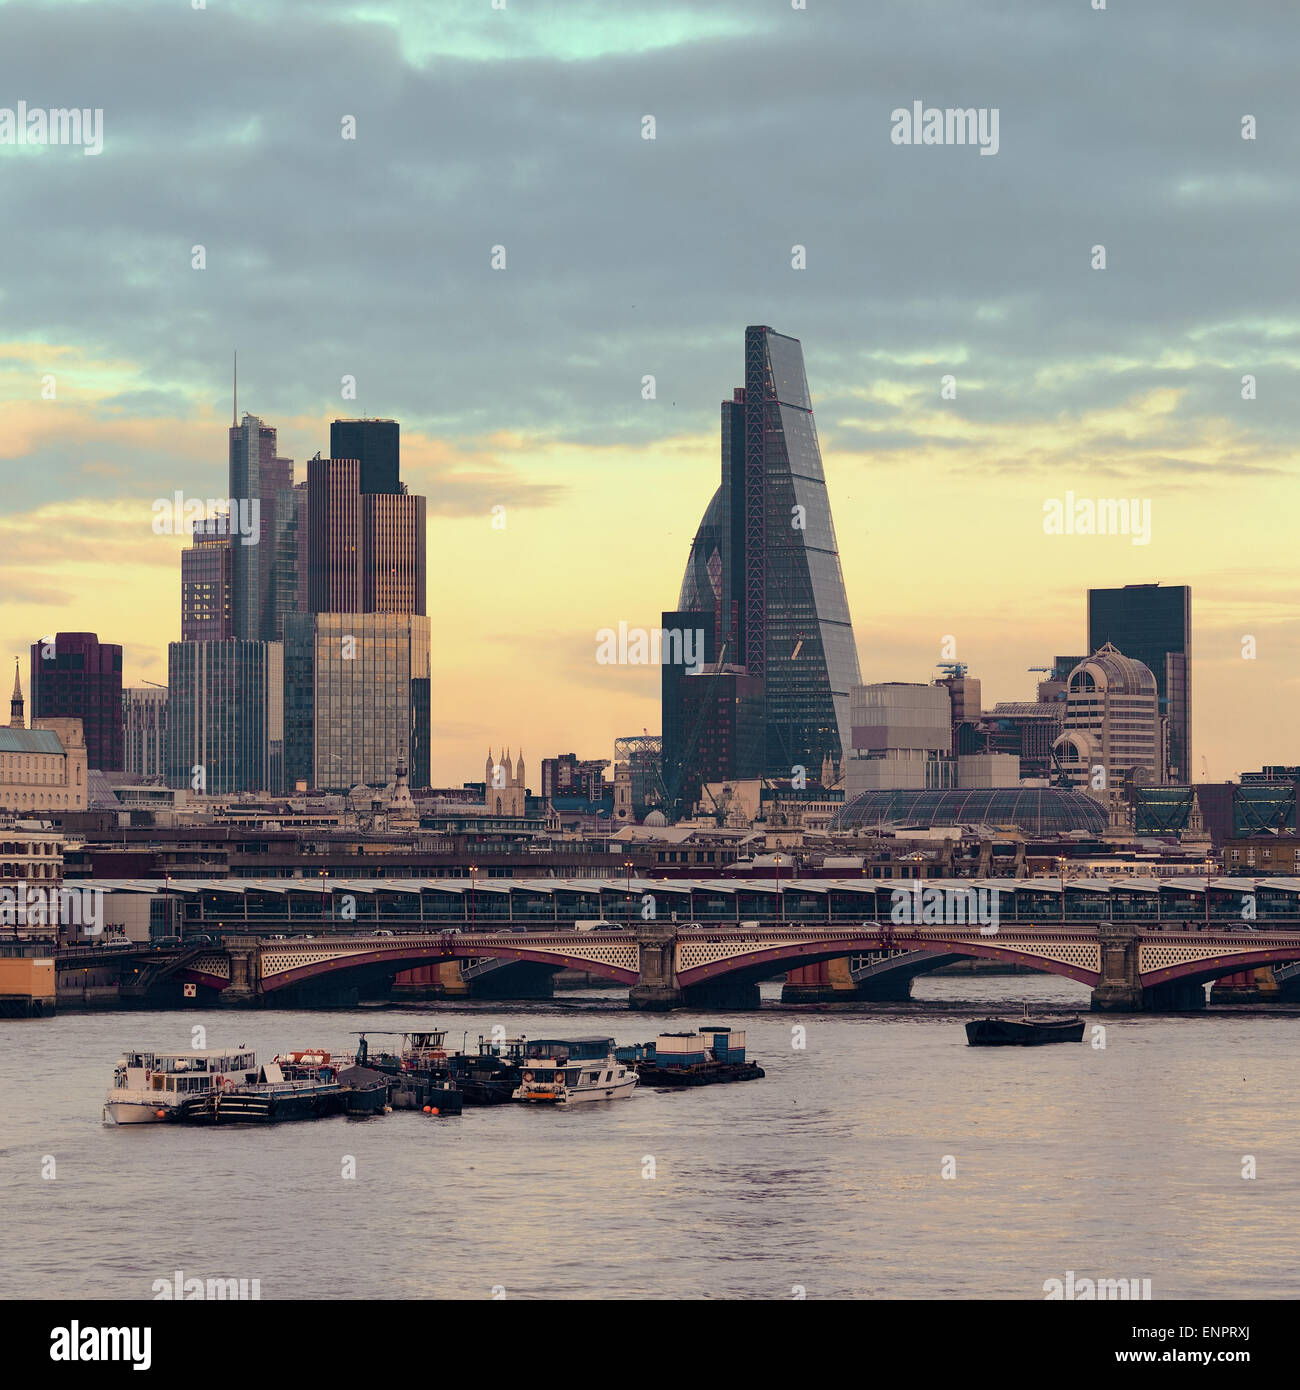 London cityscape at sunset with urban buildings over Thames River Stock Photo